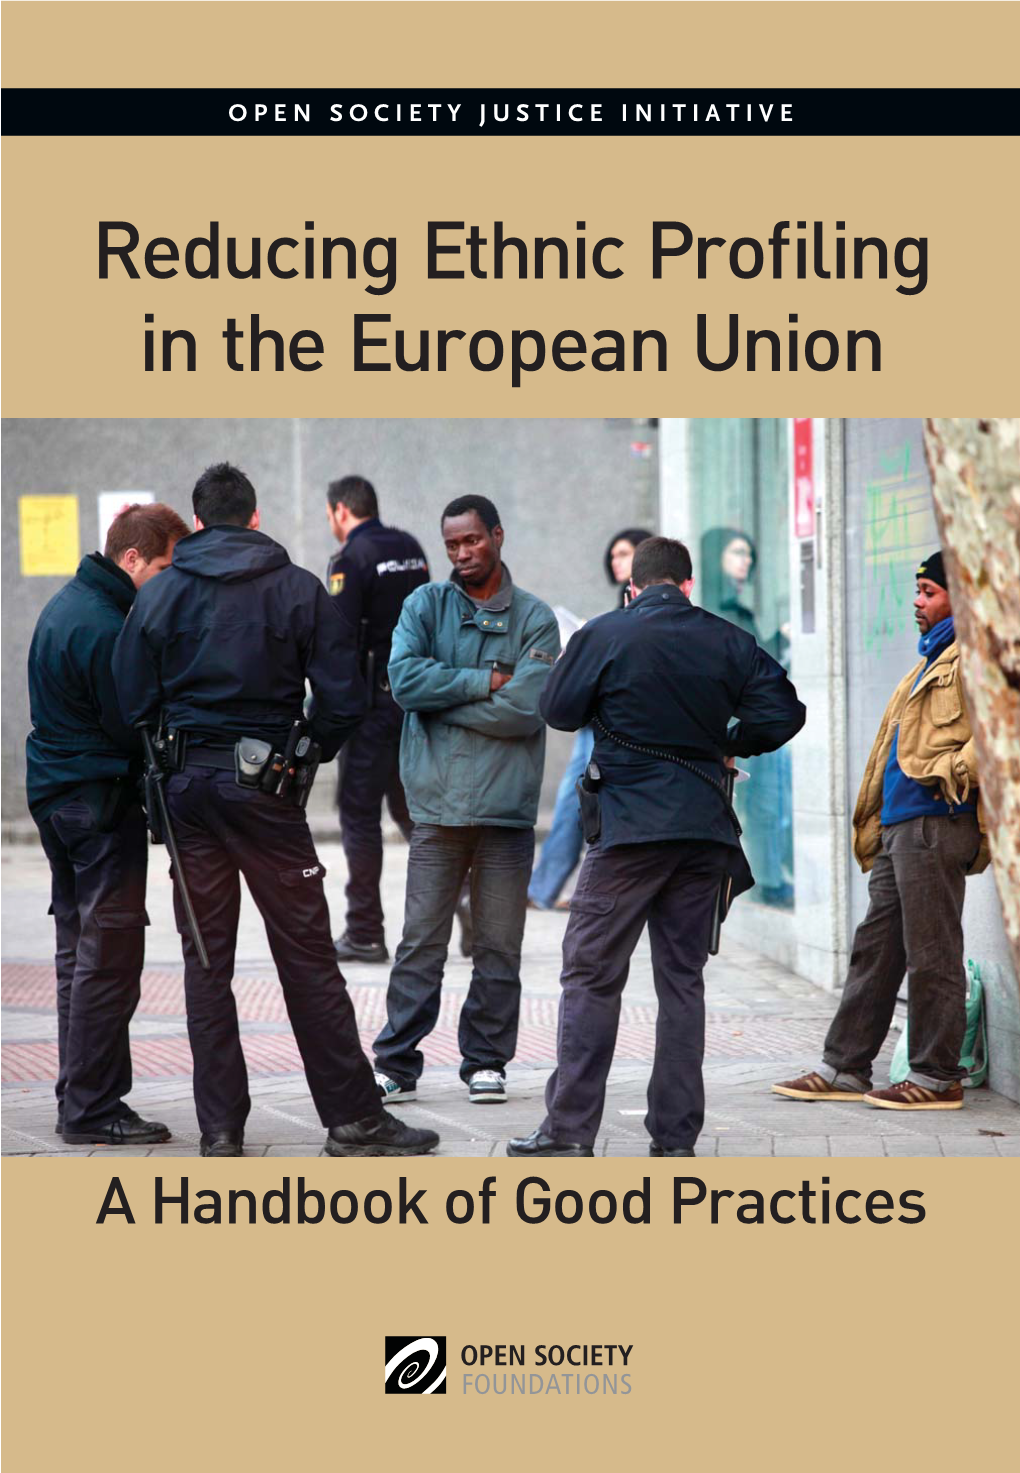 Reducing Ethnic Profiling in the European Union: a Handbook of Good Practices Copyright © 2012 Open Society Foundations